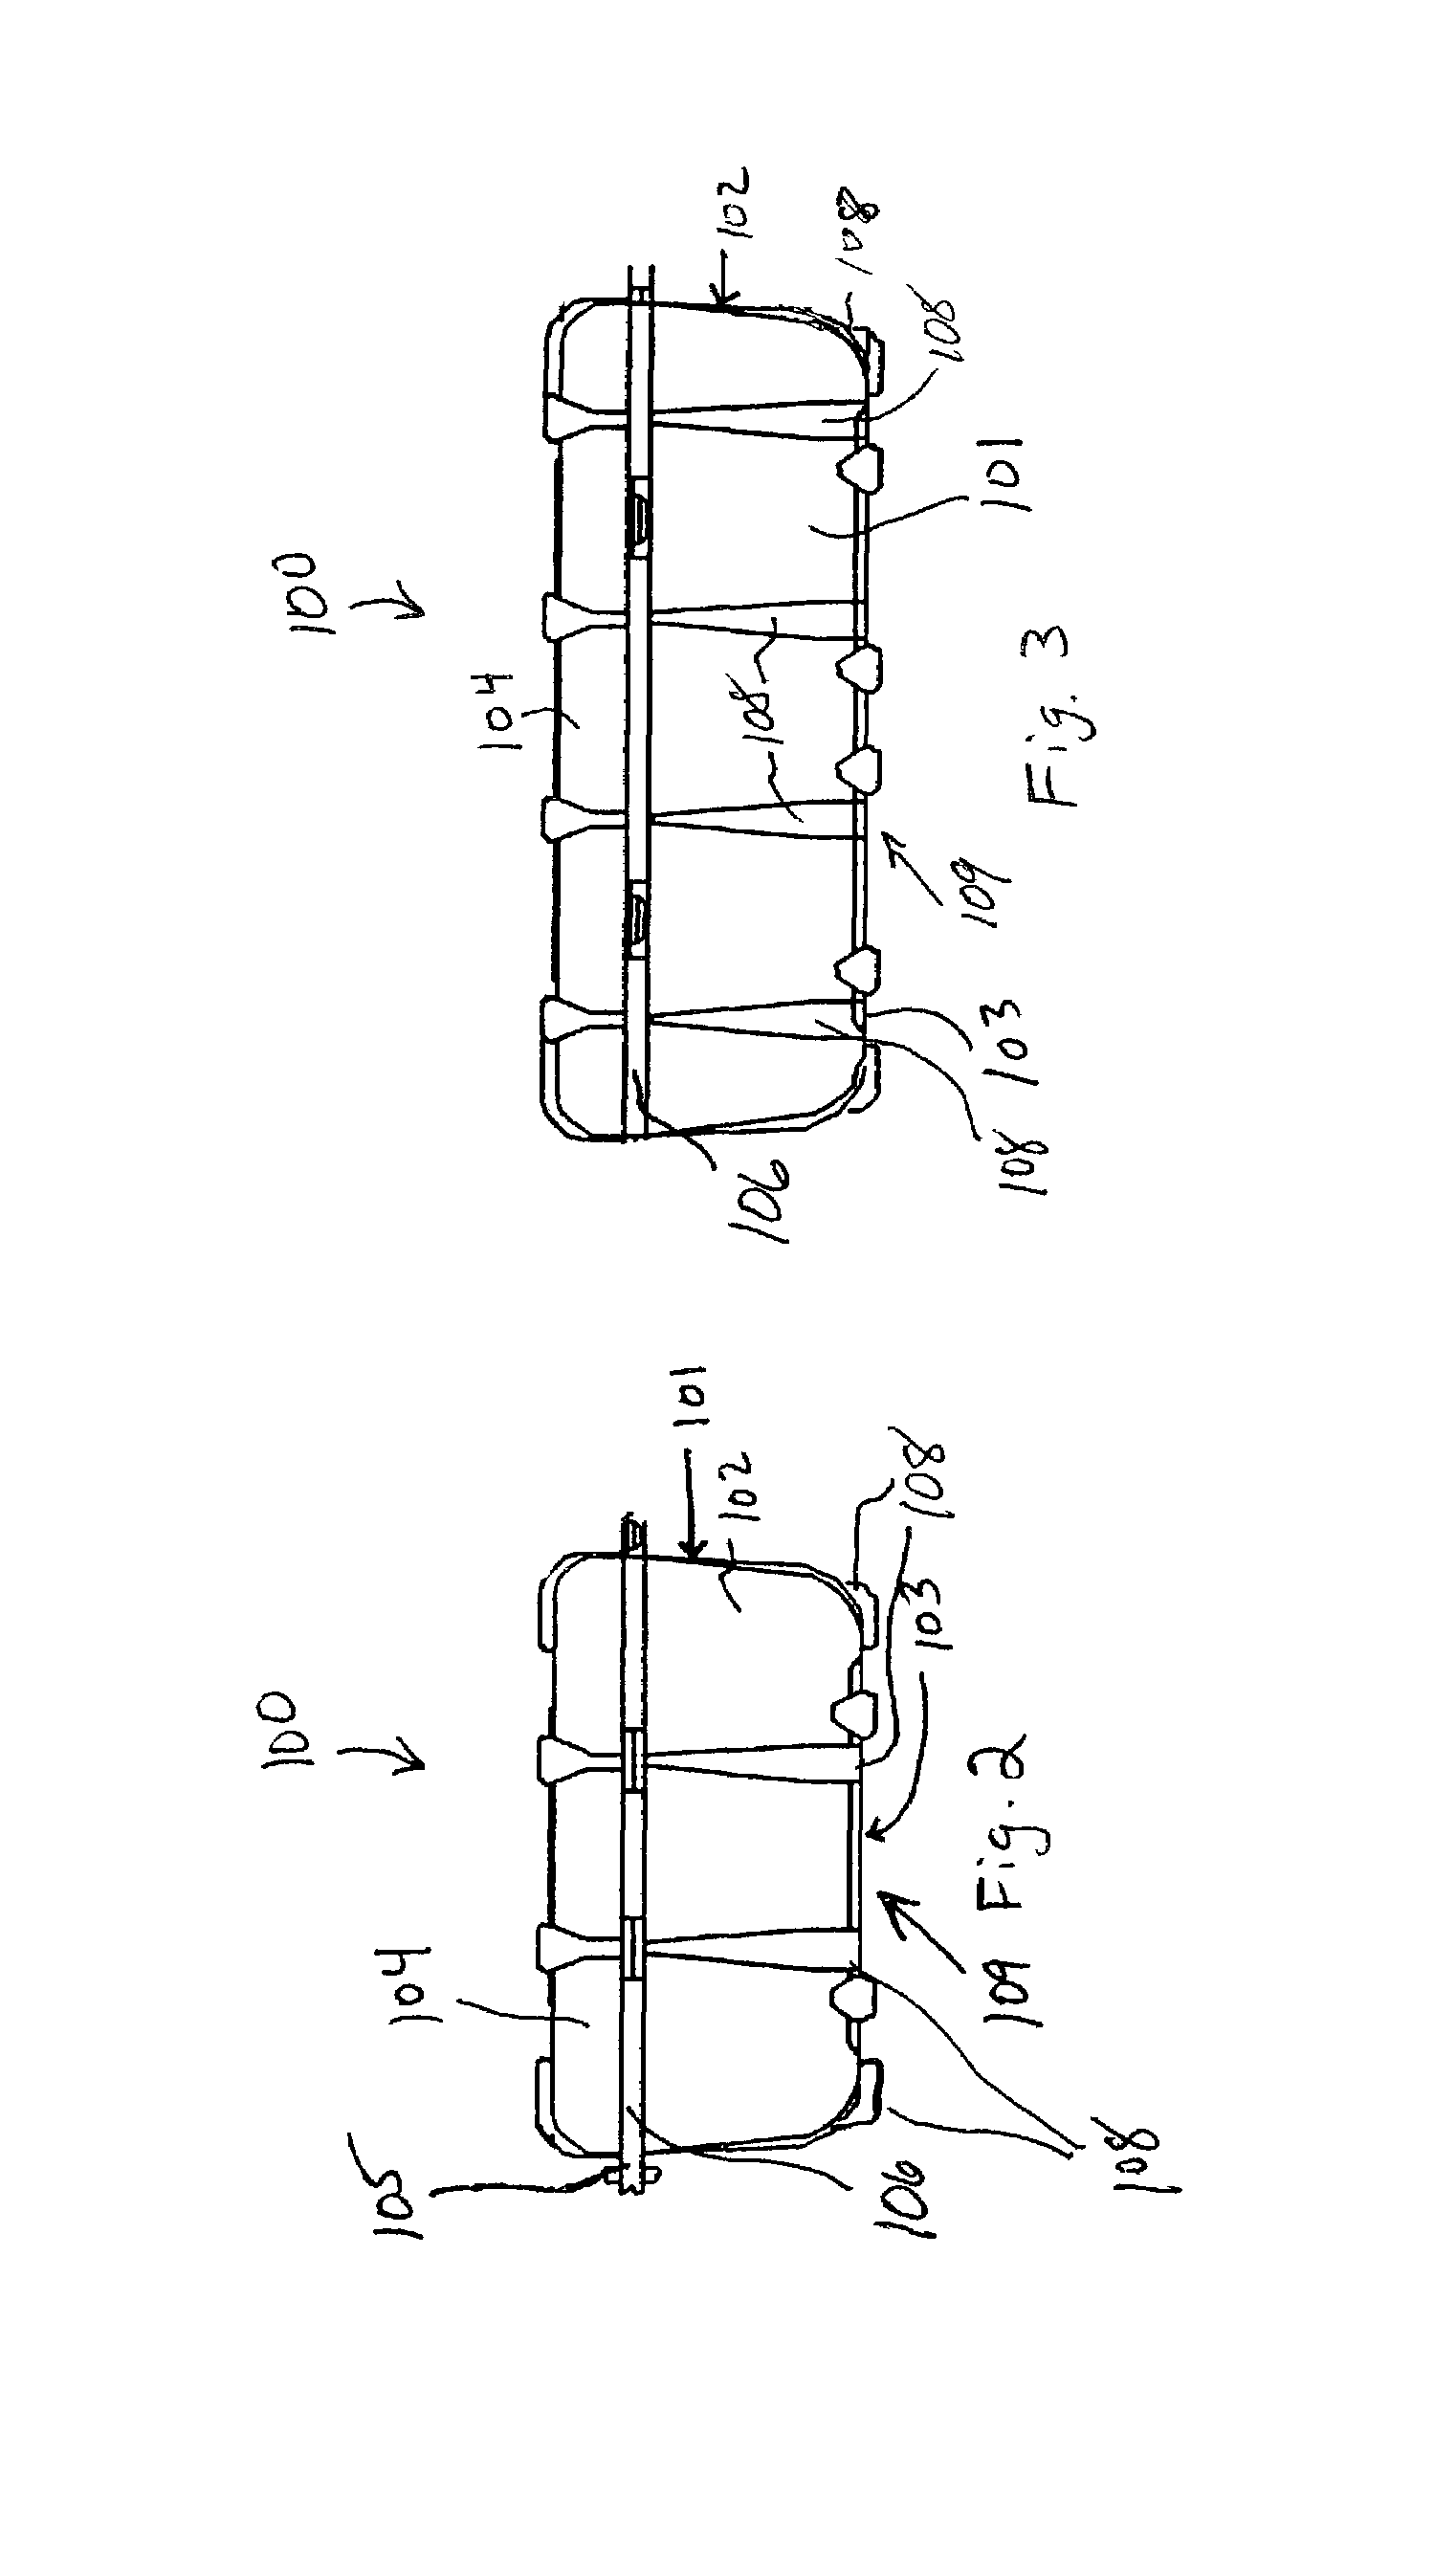 Produce carrying trays and method of cooling produce in a five-down configuration